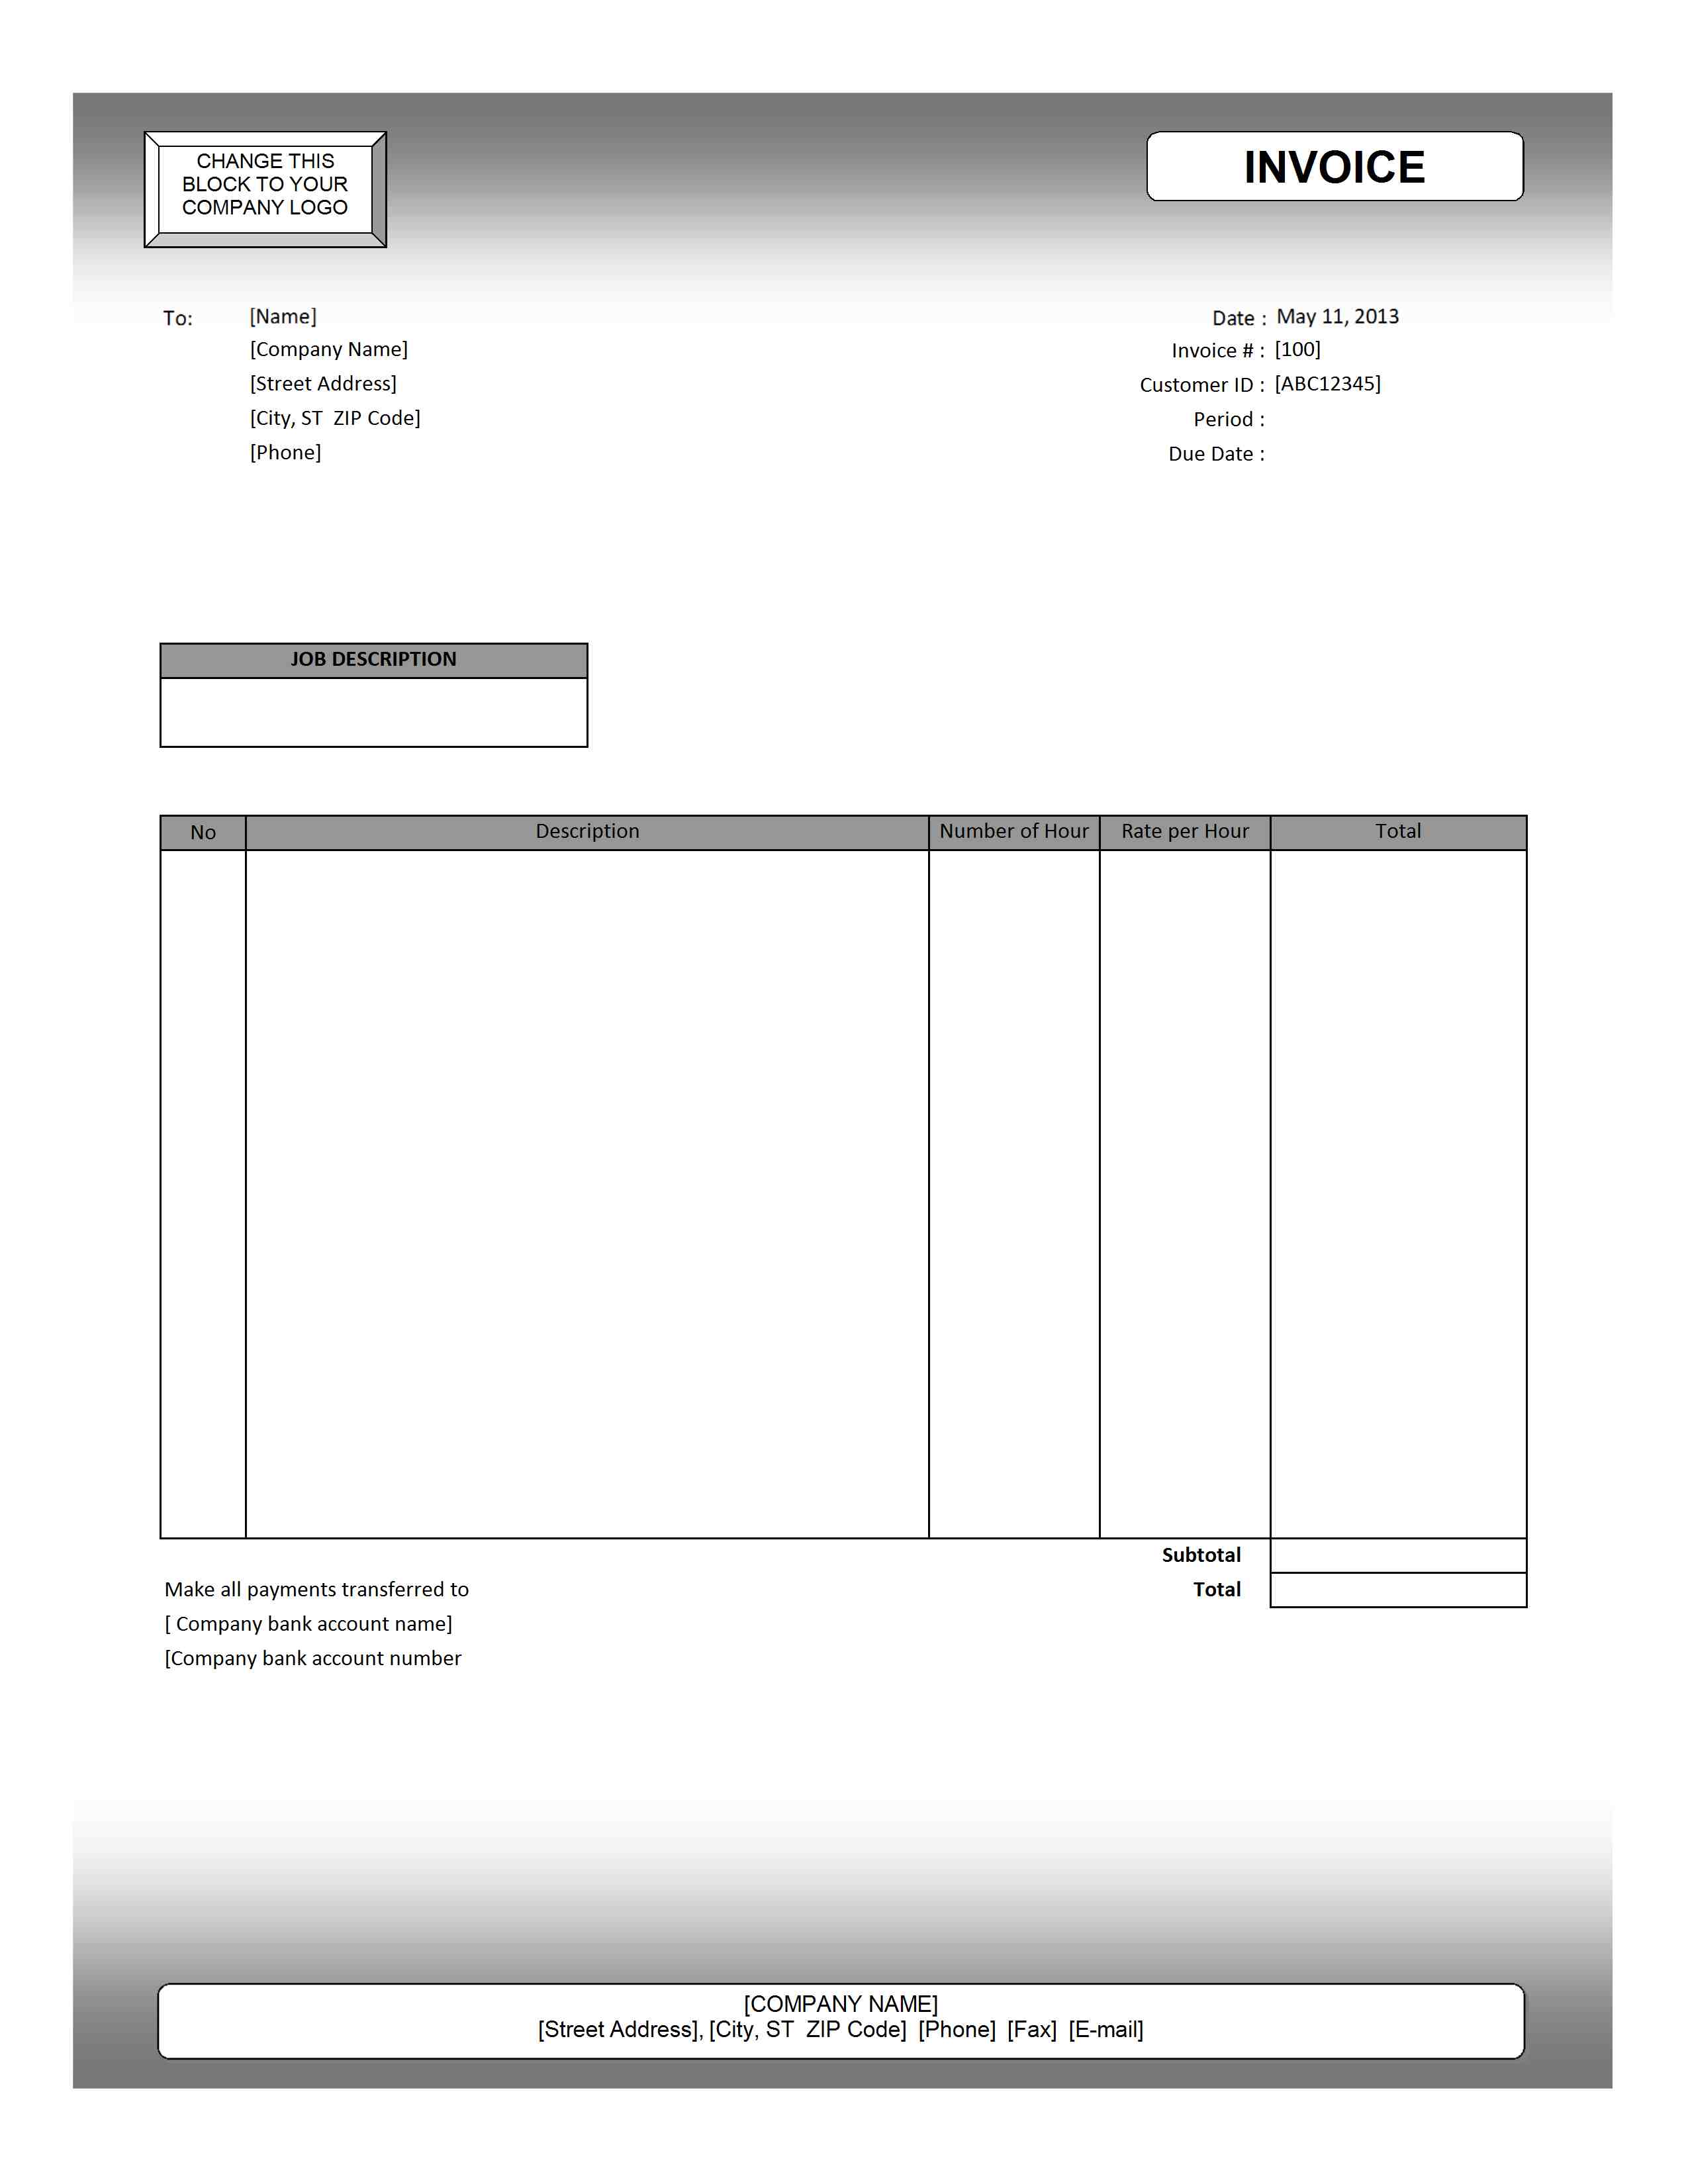 invoice simple template excel download